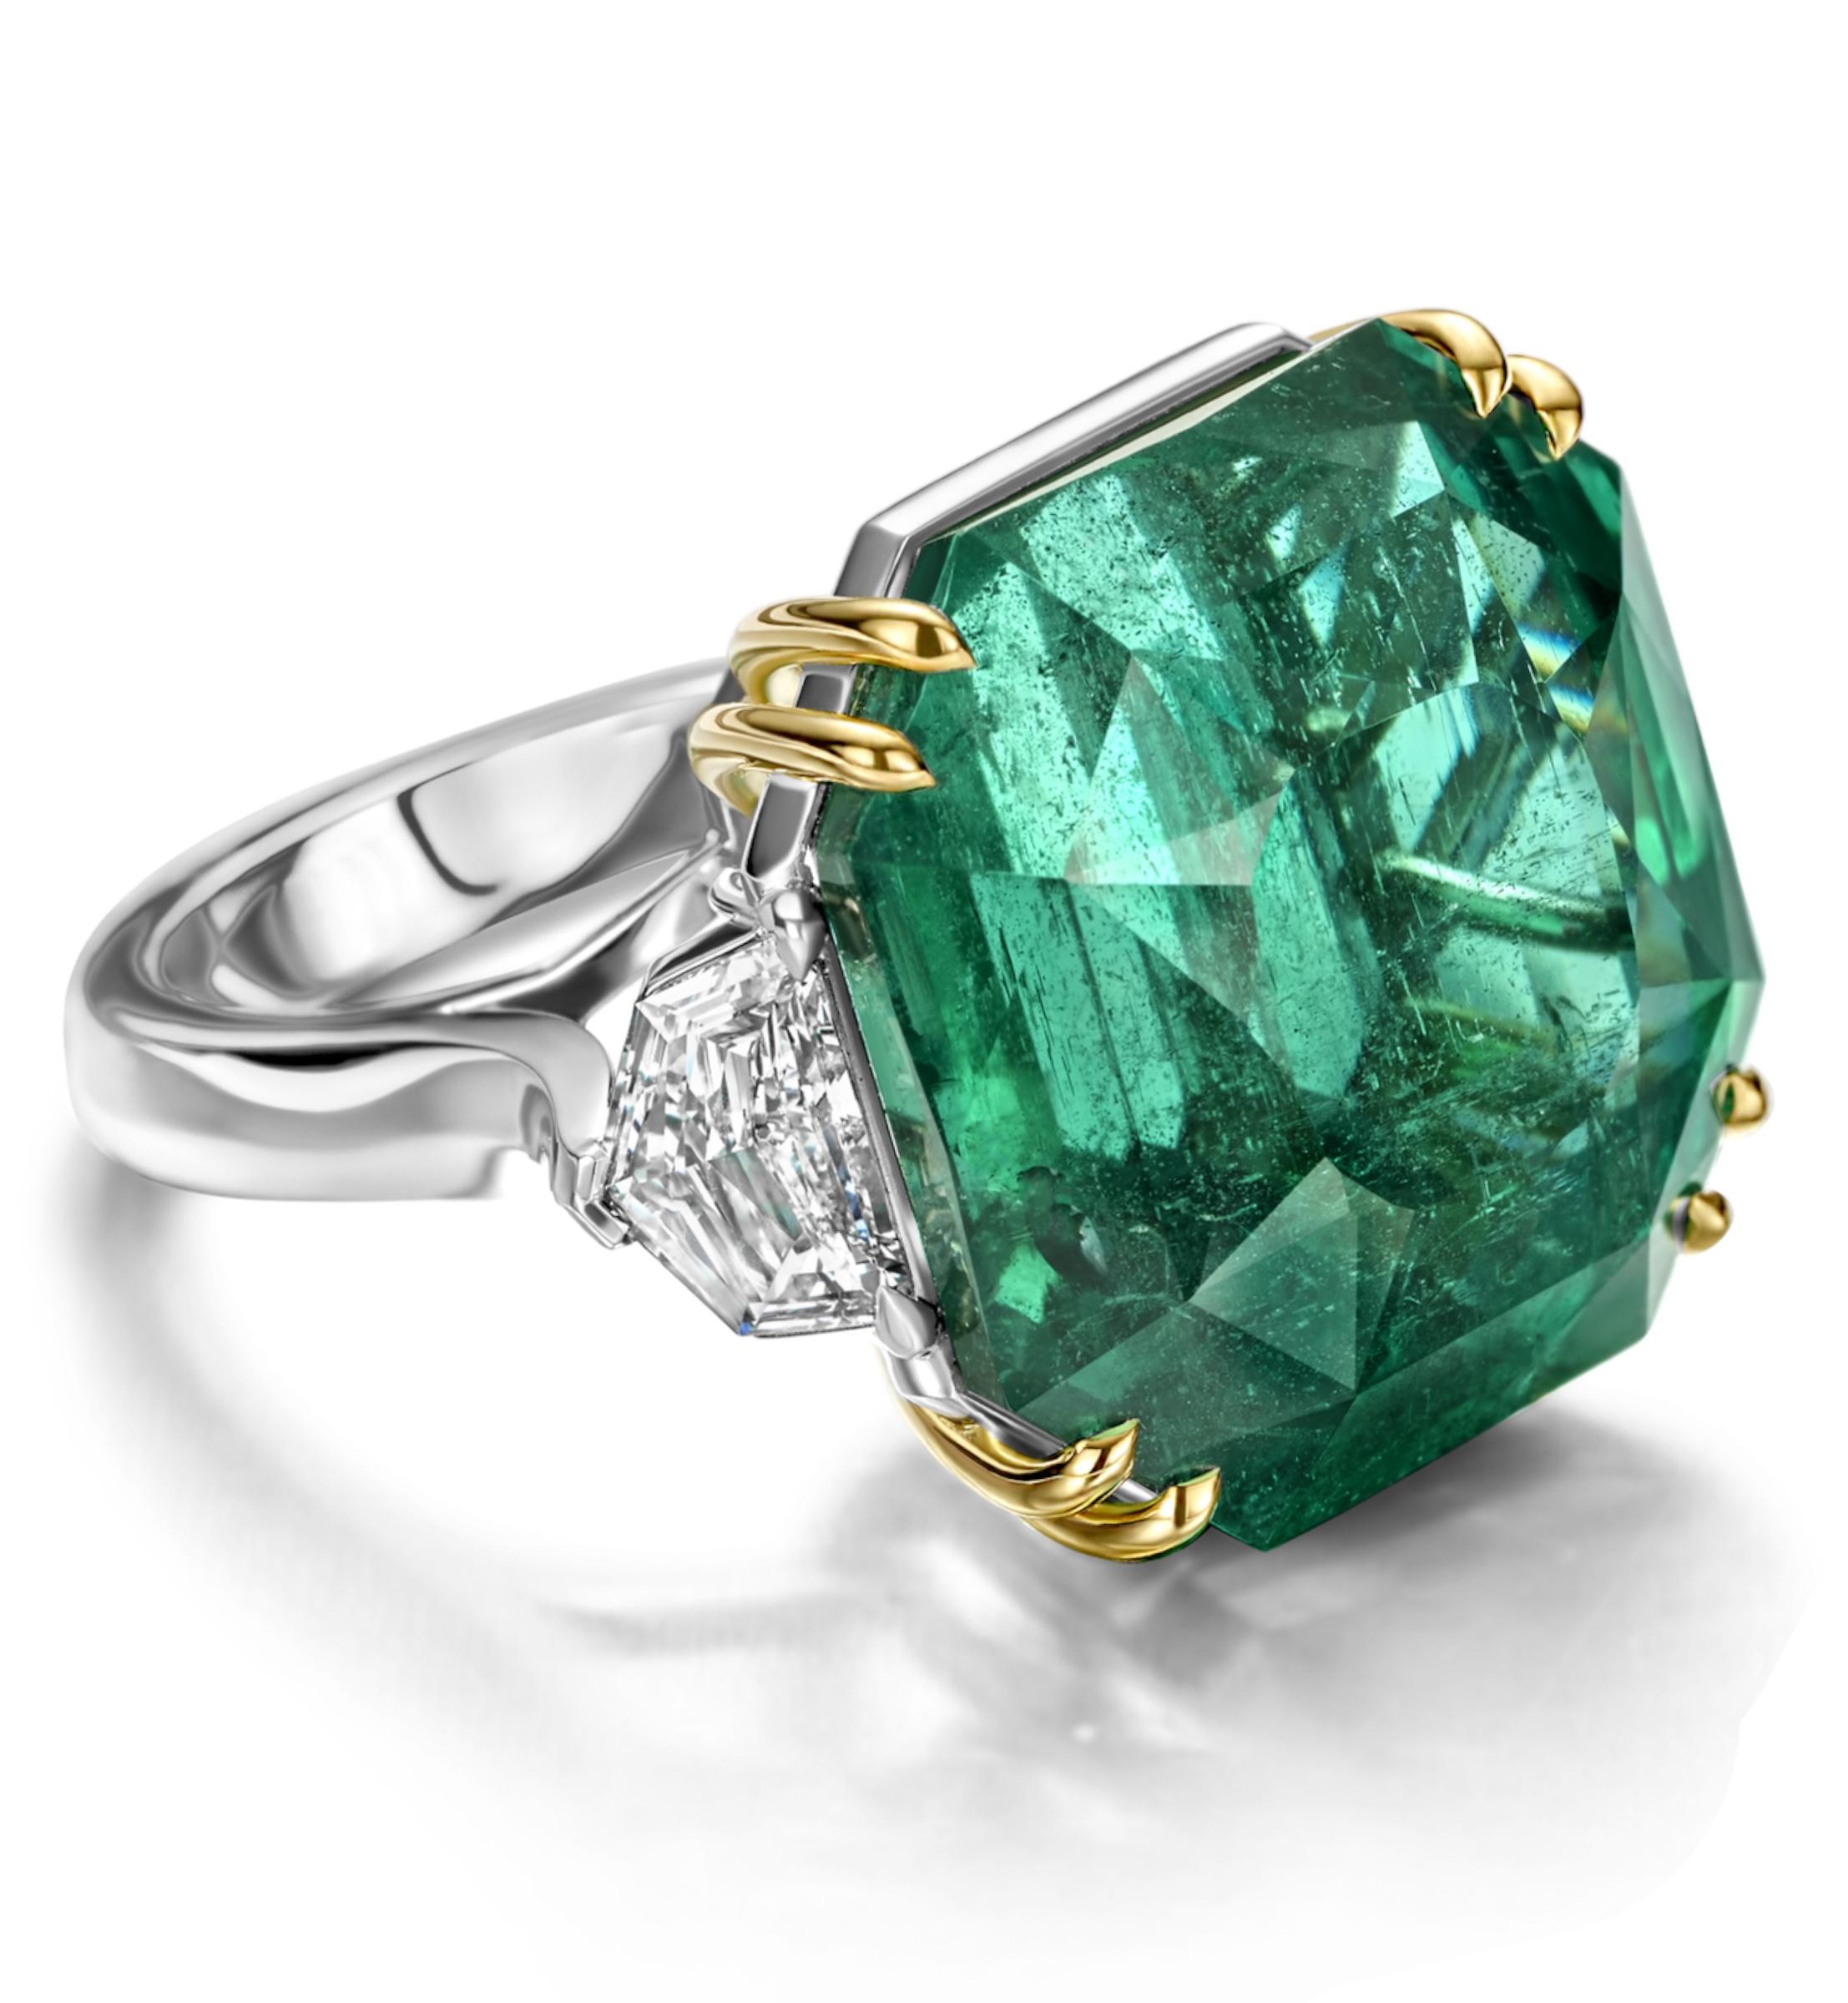 Magnificent Platinum Ring With a GRS Certified 37 ct No Oil Emerald & 1.21ct diamonds .

Extremely Rare and Collectable Investment Stone,from such a size with this amazing color and life !

The Emerald is one of the most difficult stones to